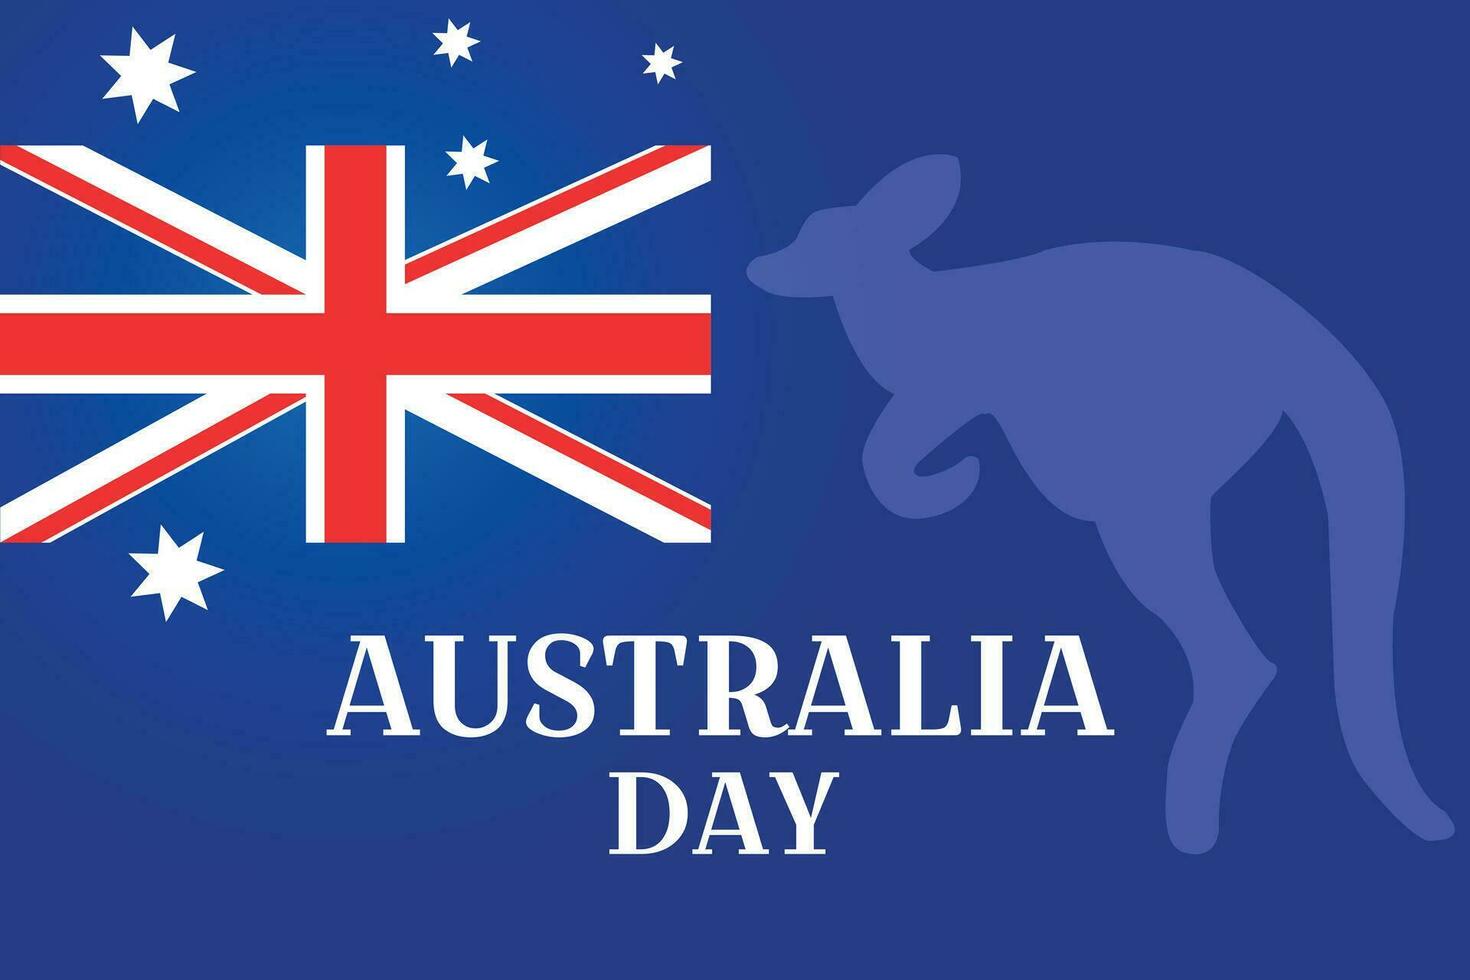 Australia Day 26 January. Australia flag with kangaroo silhouette. A great poster or banner for the holiday. Vector illustration.